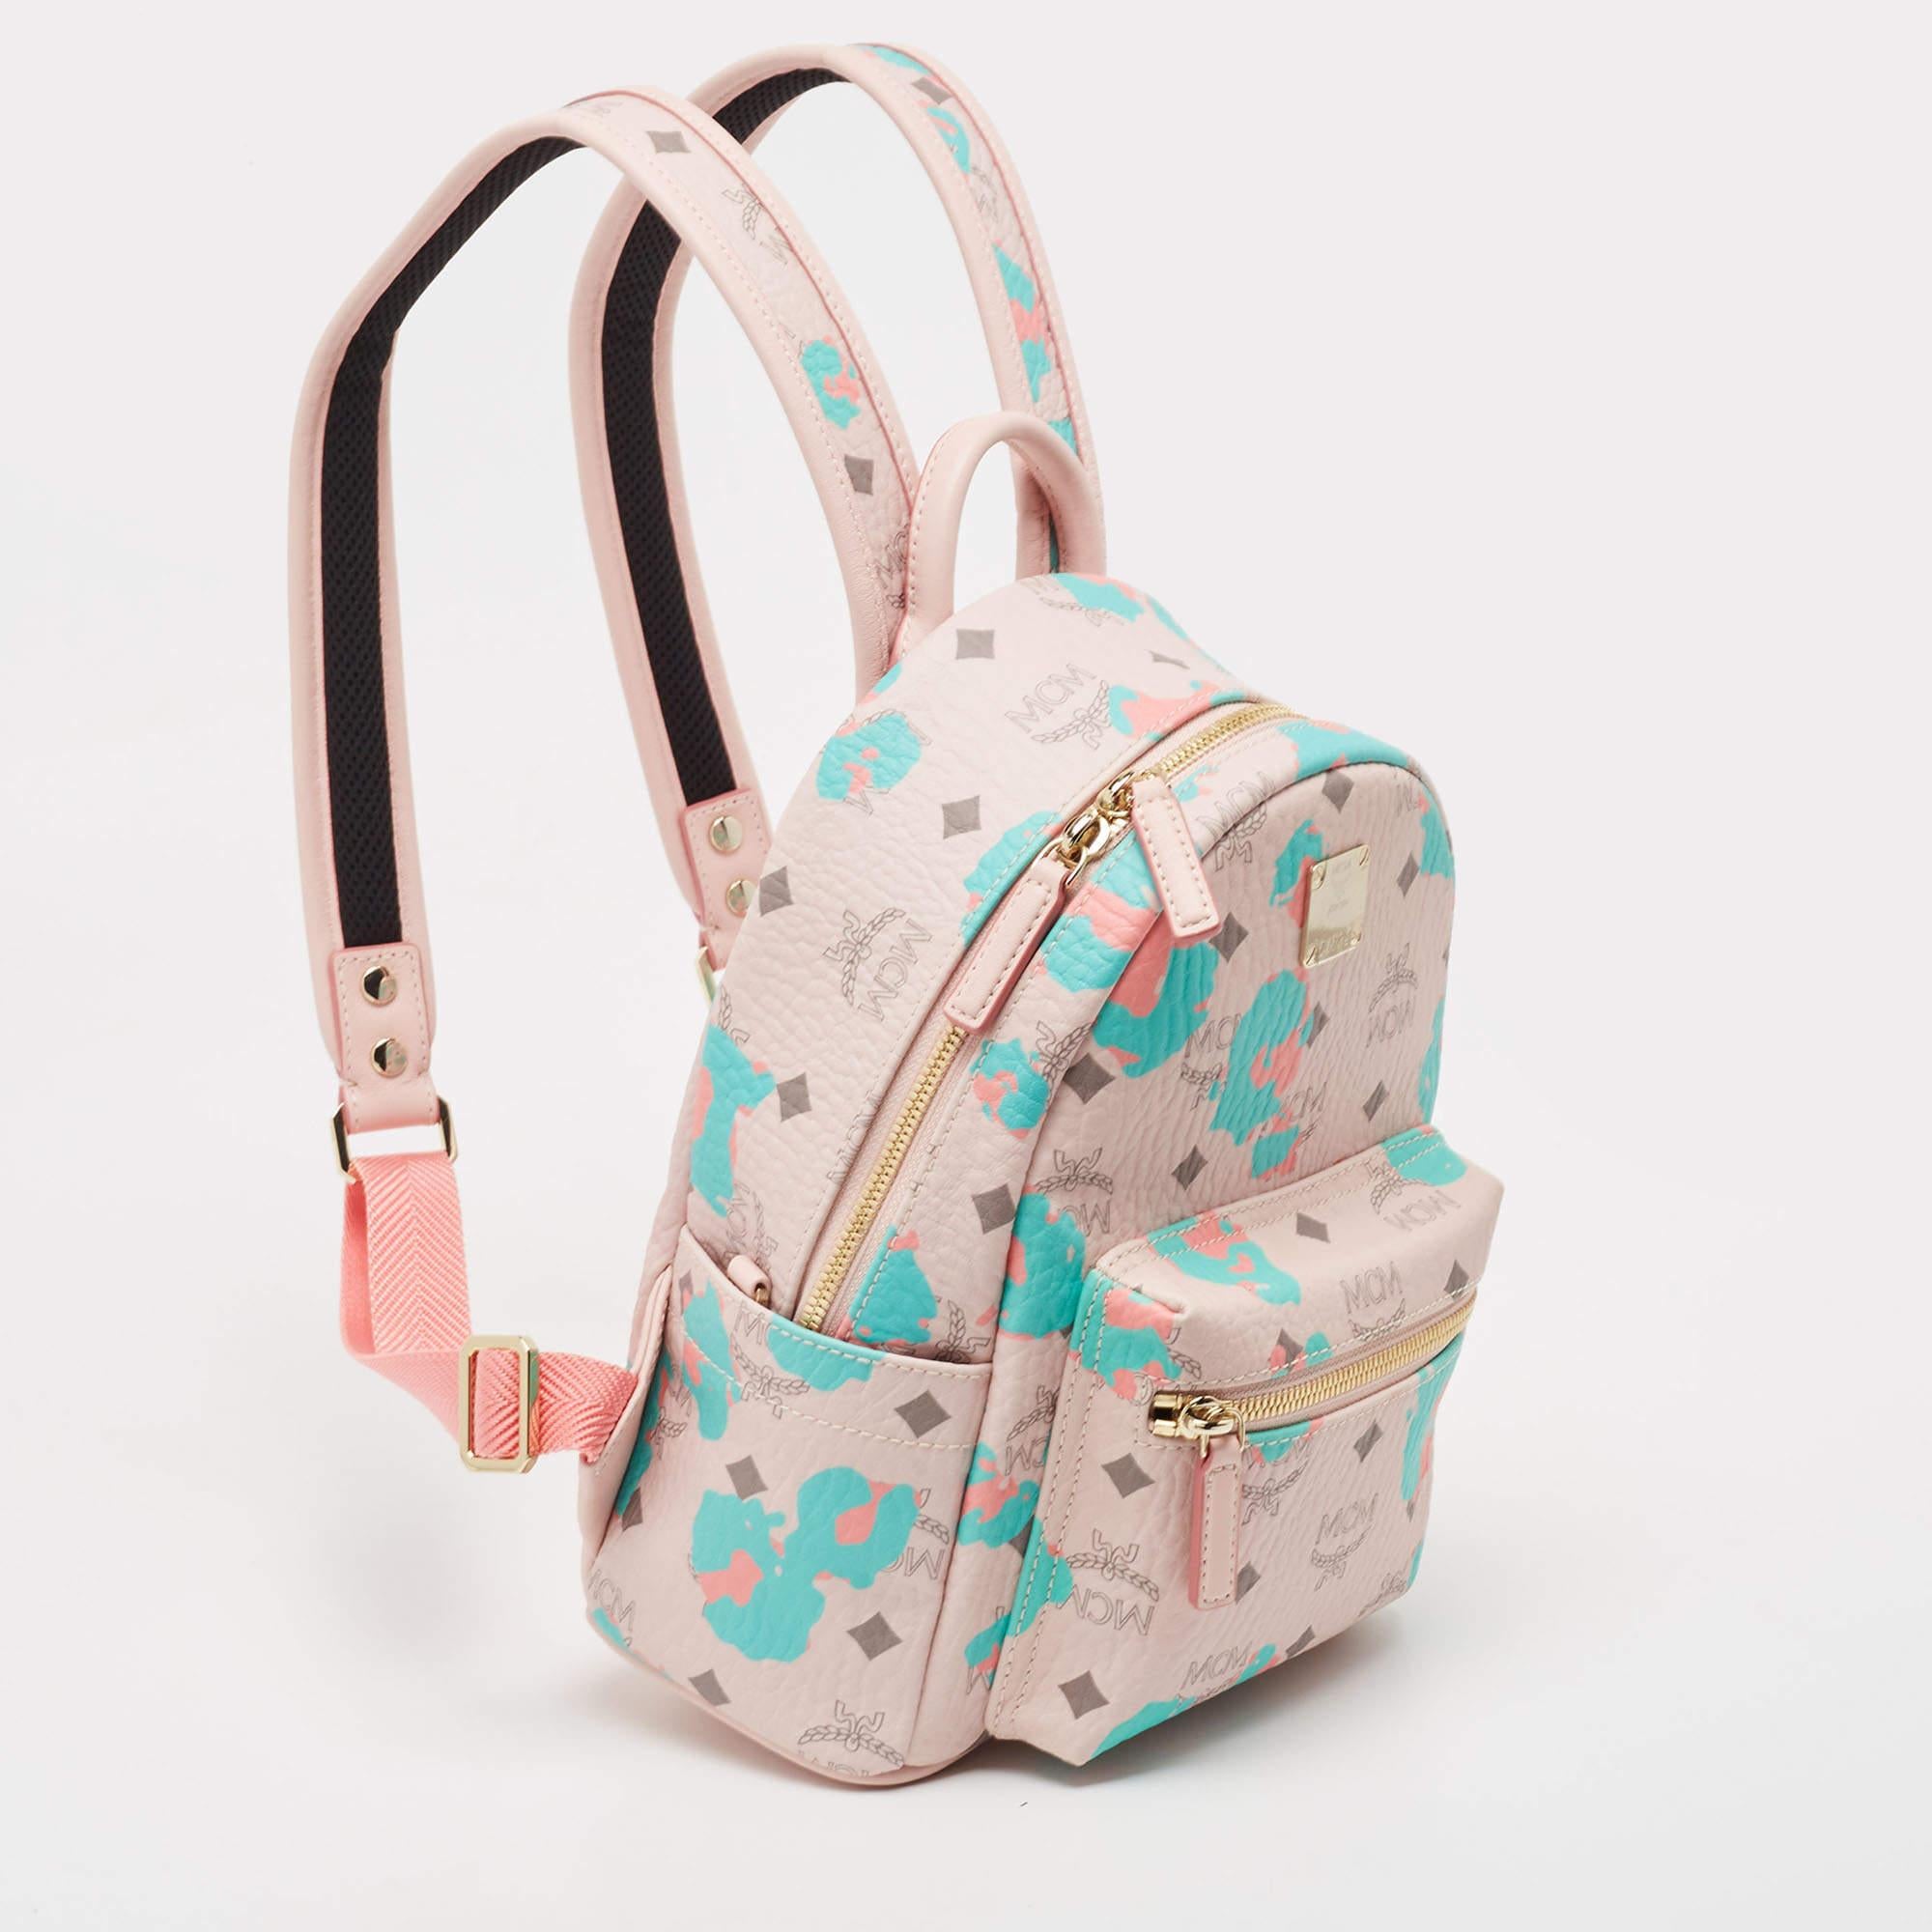 This MCM Stark backpack will come in handy for daily use or as a style statement. It is crafted from pink Visetos coated canvas and leather and designed with gold-tone studs on the sides. It features a front zip pocket and two slip pockets on the